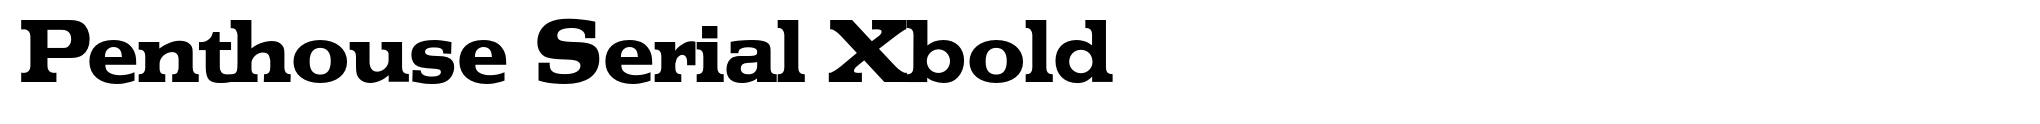 Penthouse Serial Xbold image